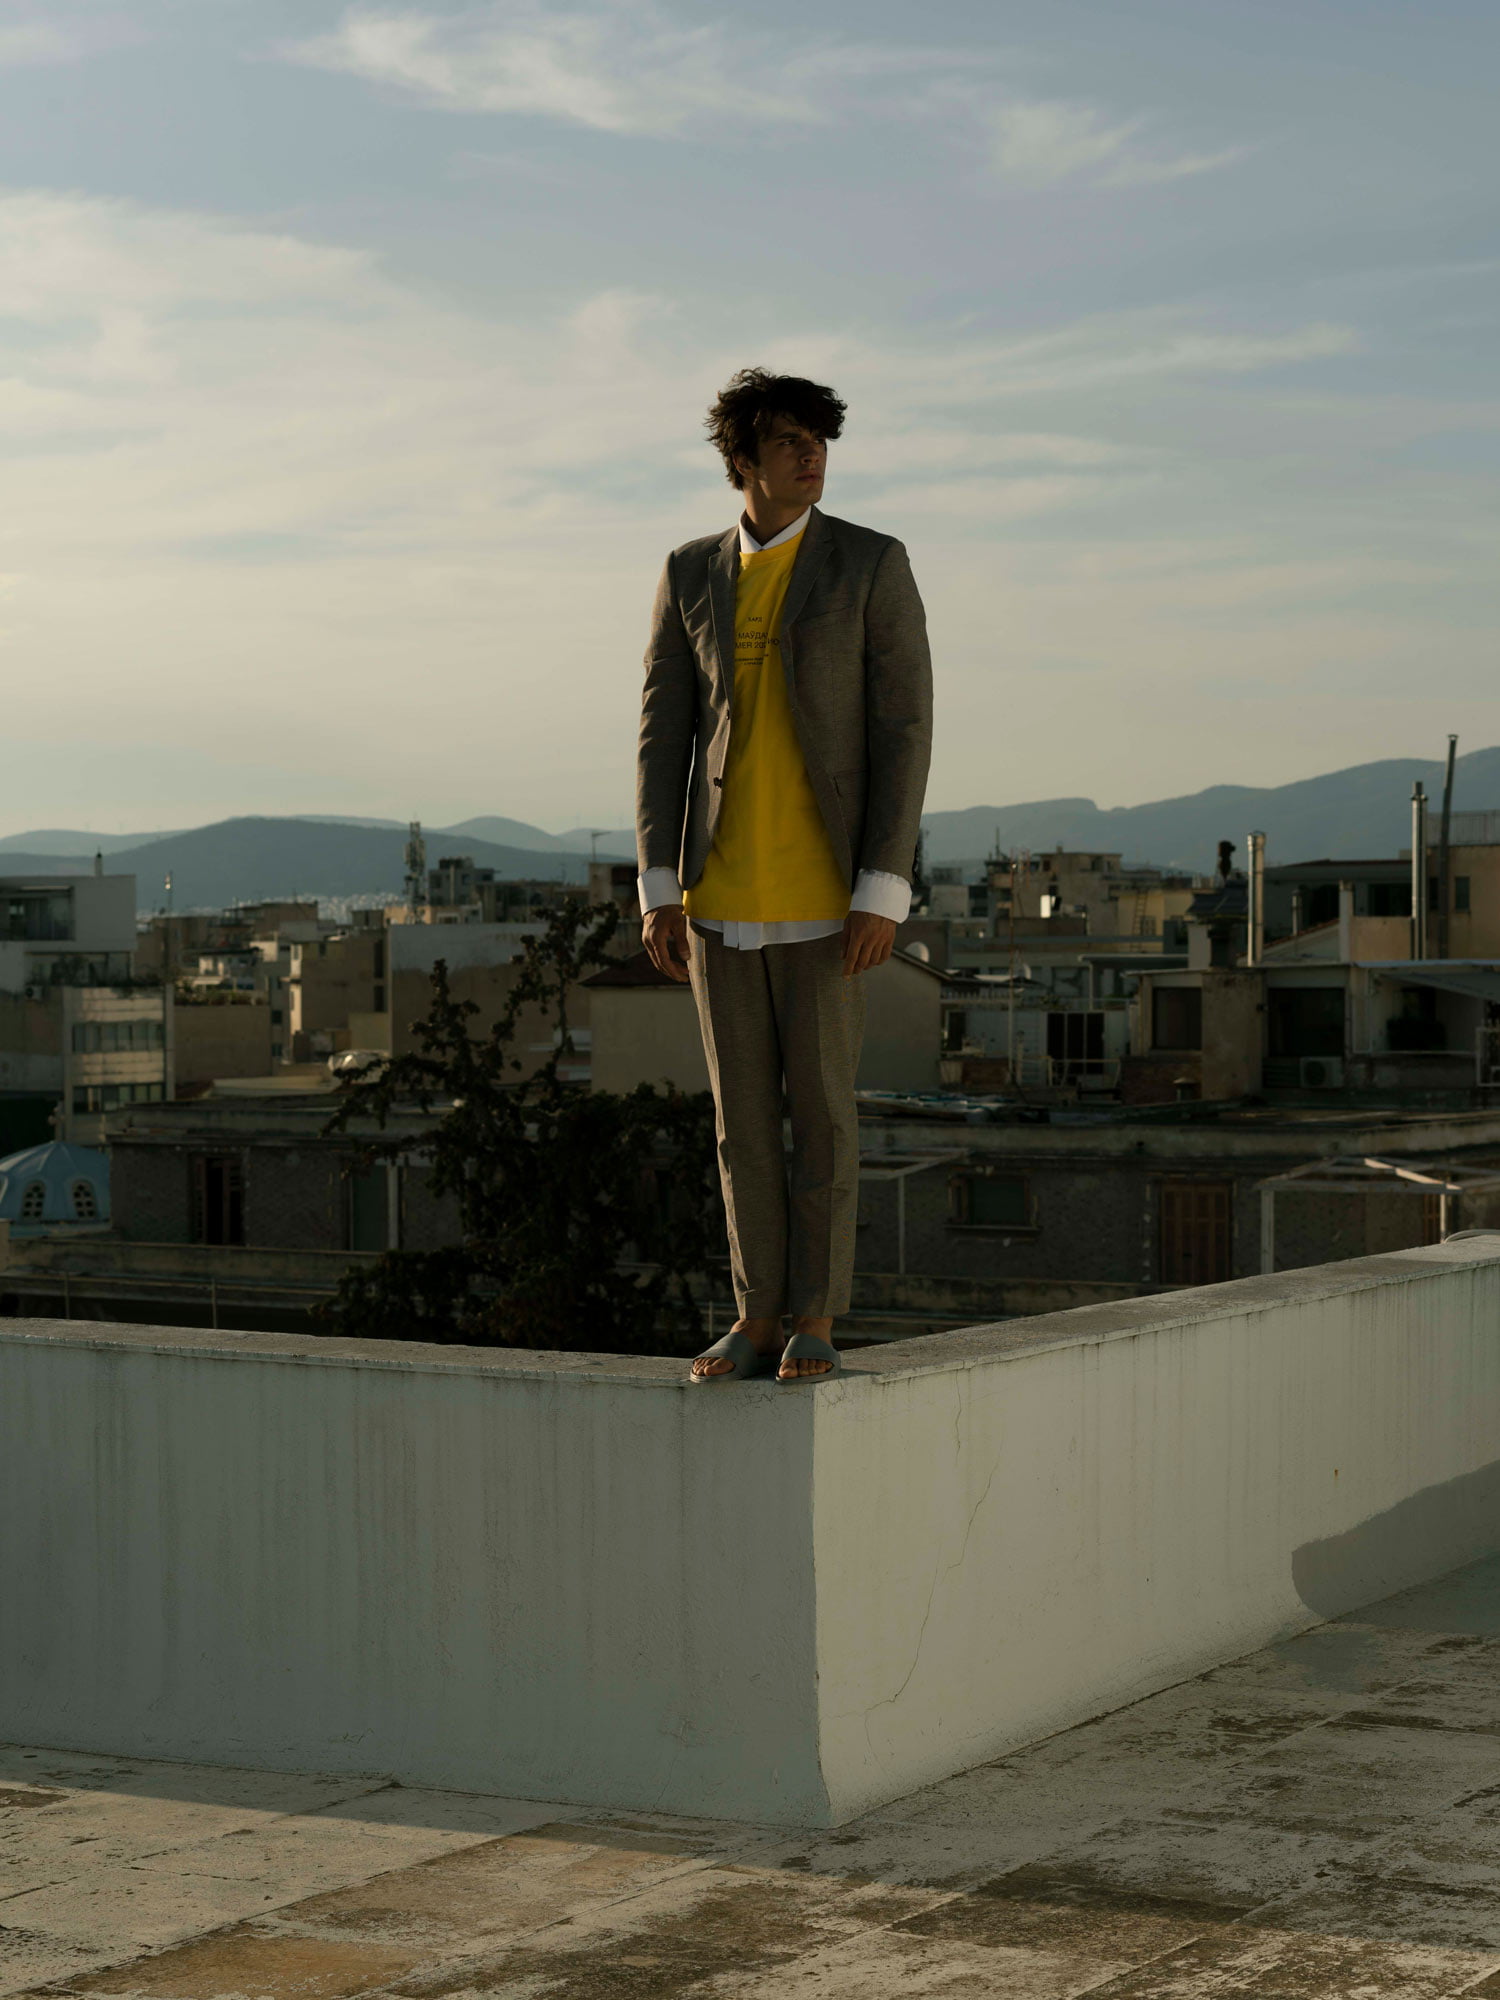 Portrait of a man wearing a suit on the edge of a rooftop